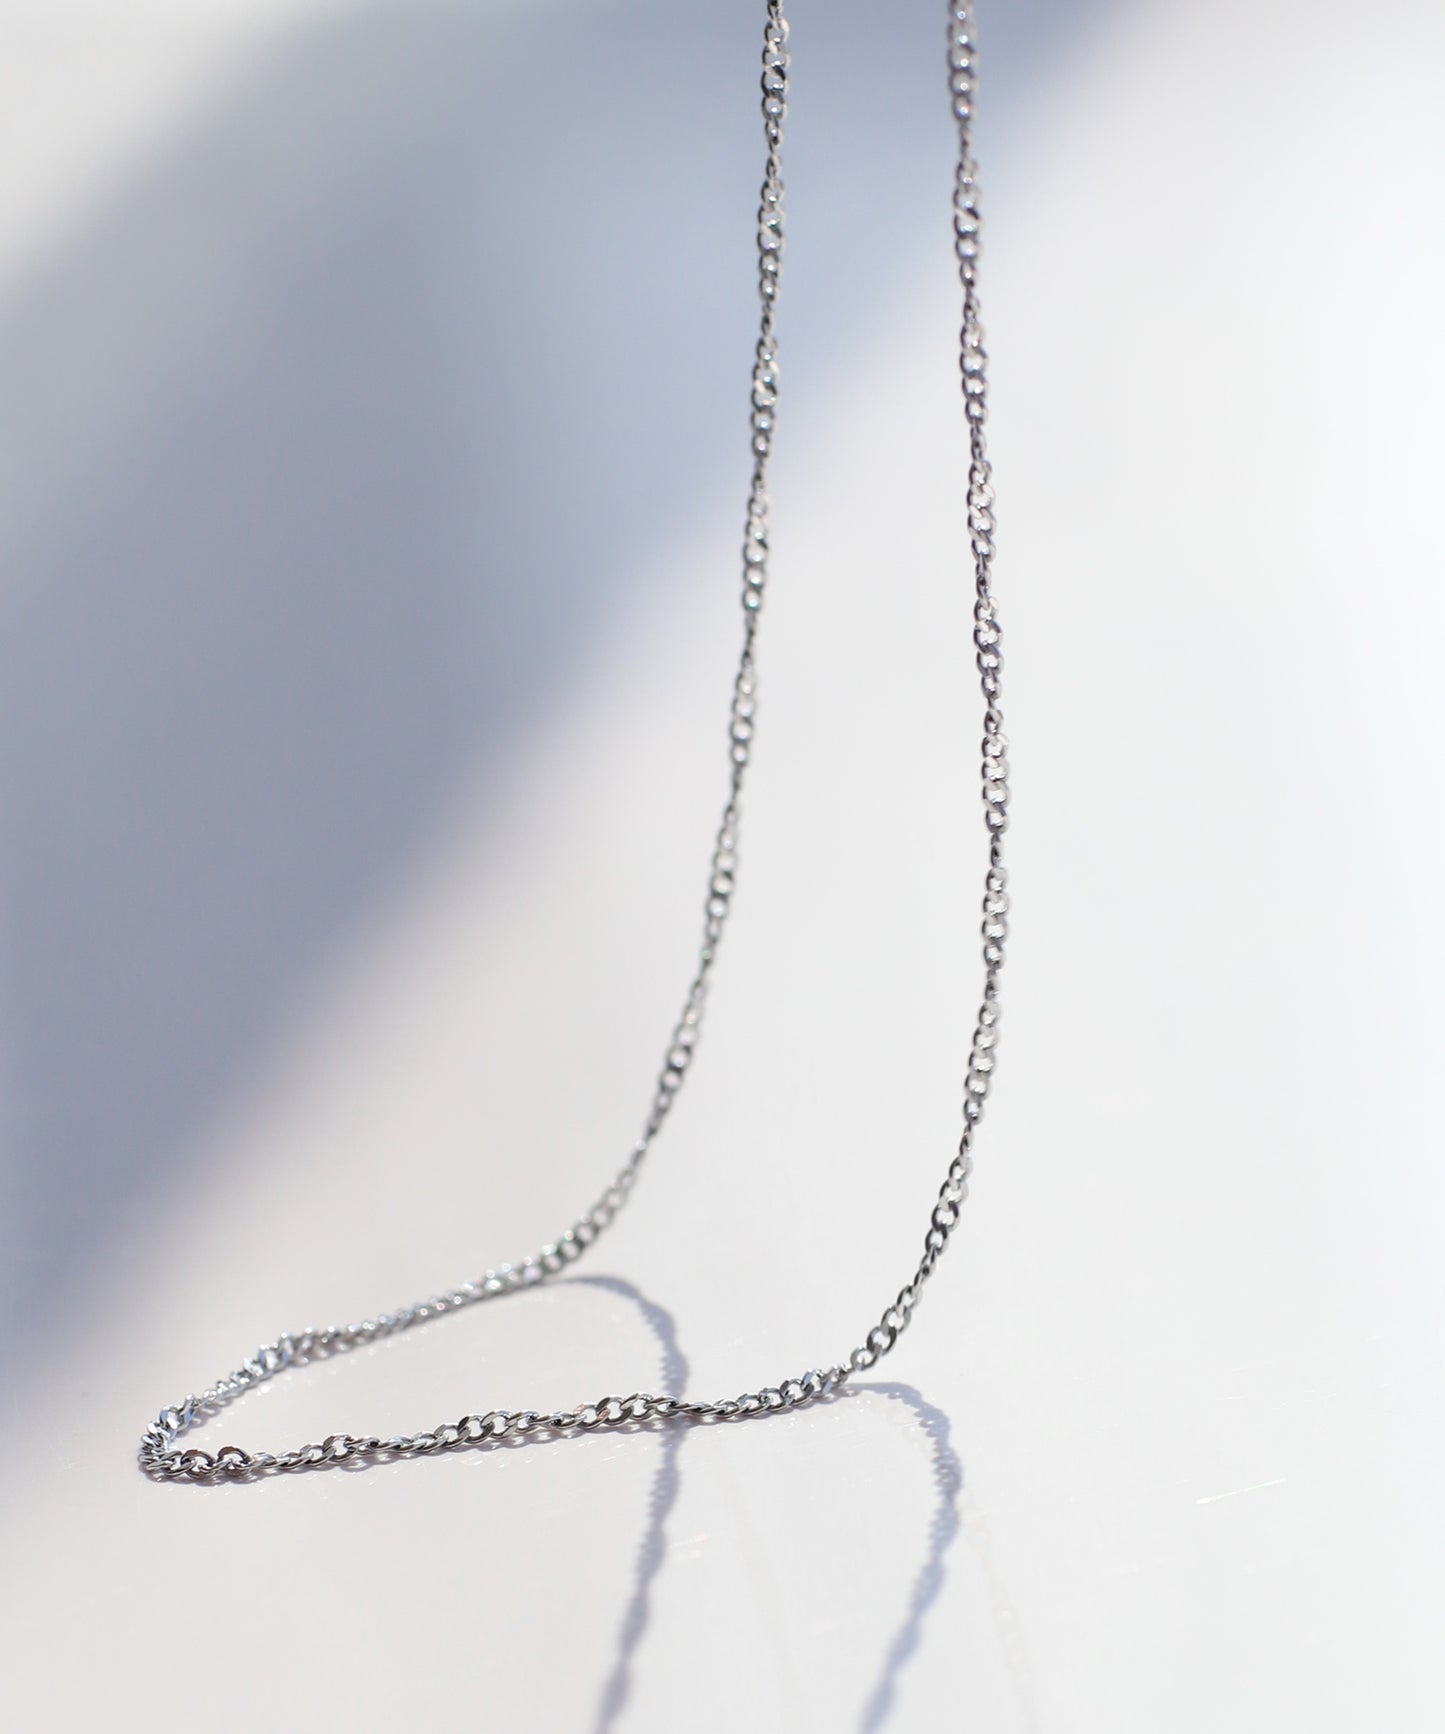 【Stainless Steel IP】Chain Necklace [B]